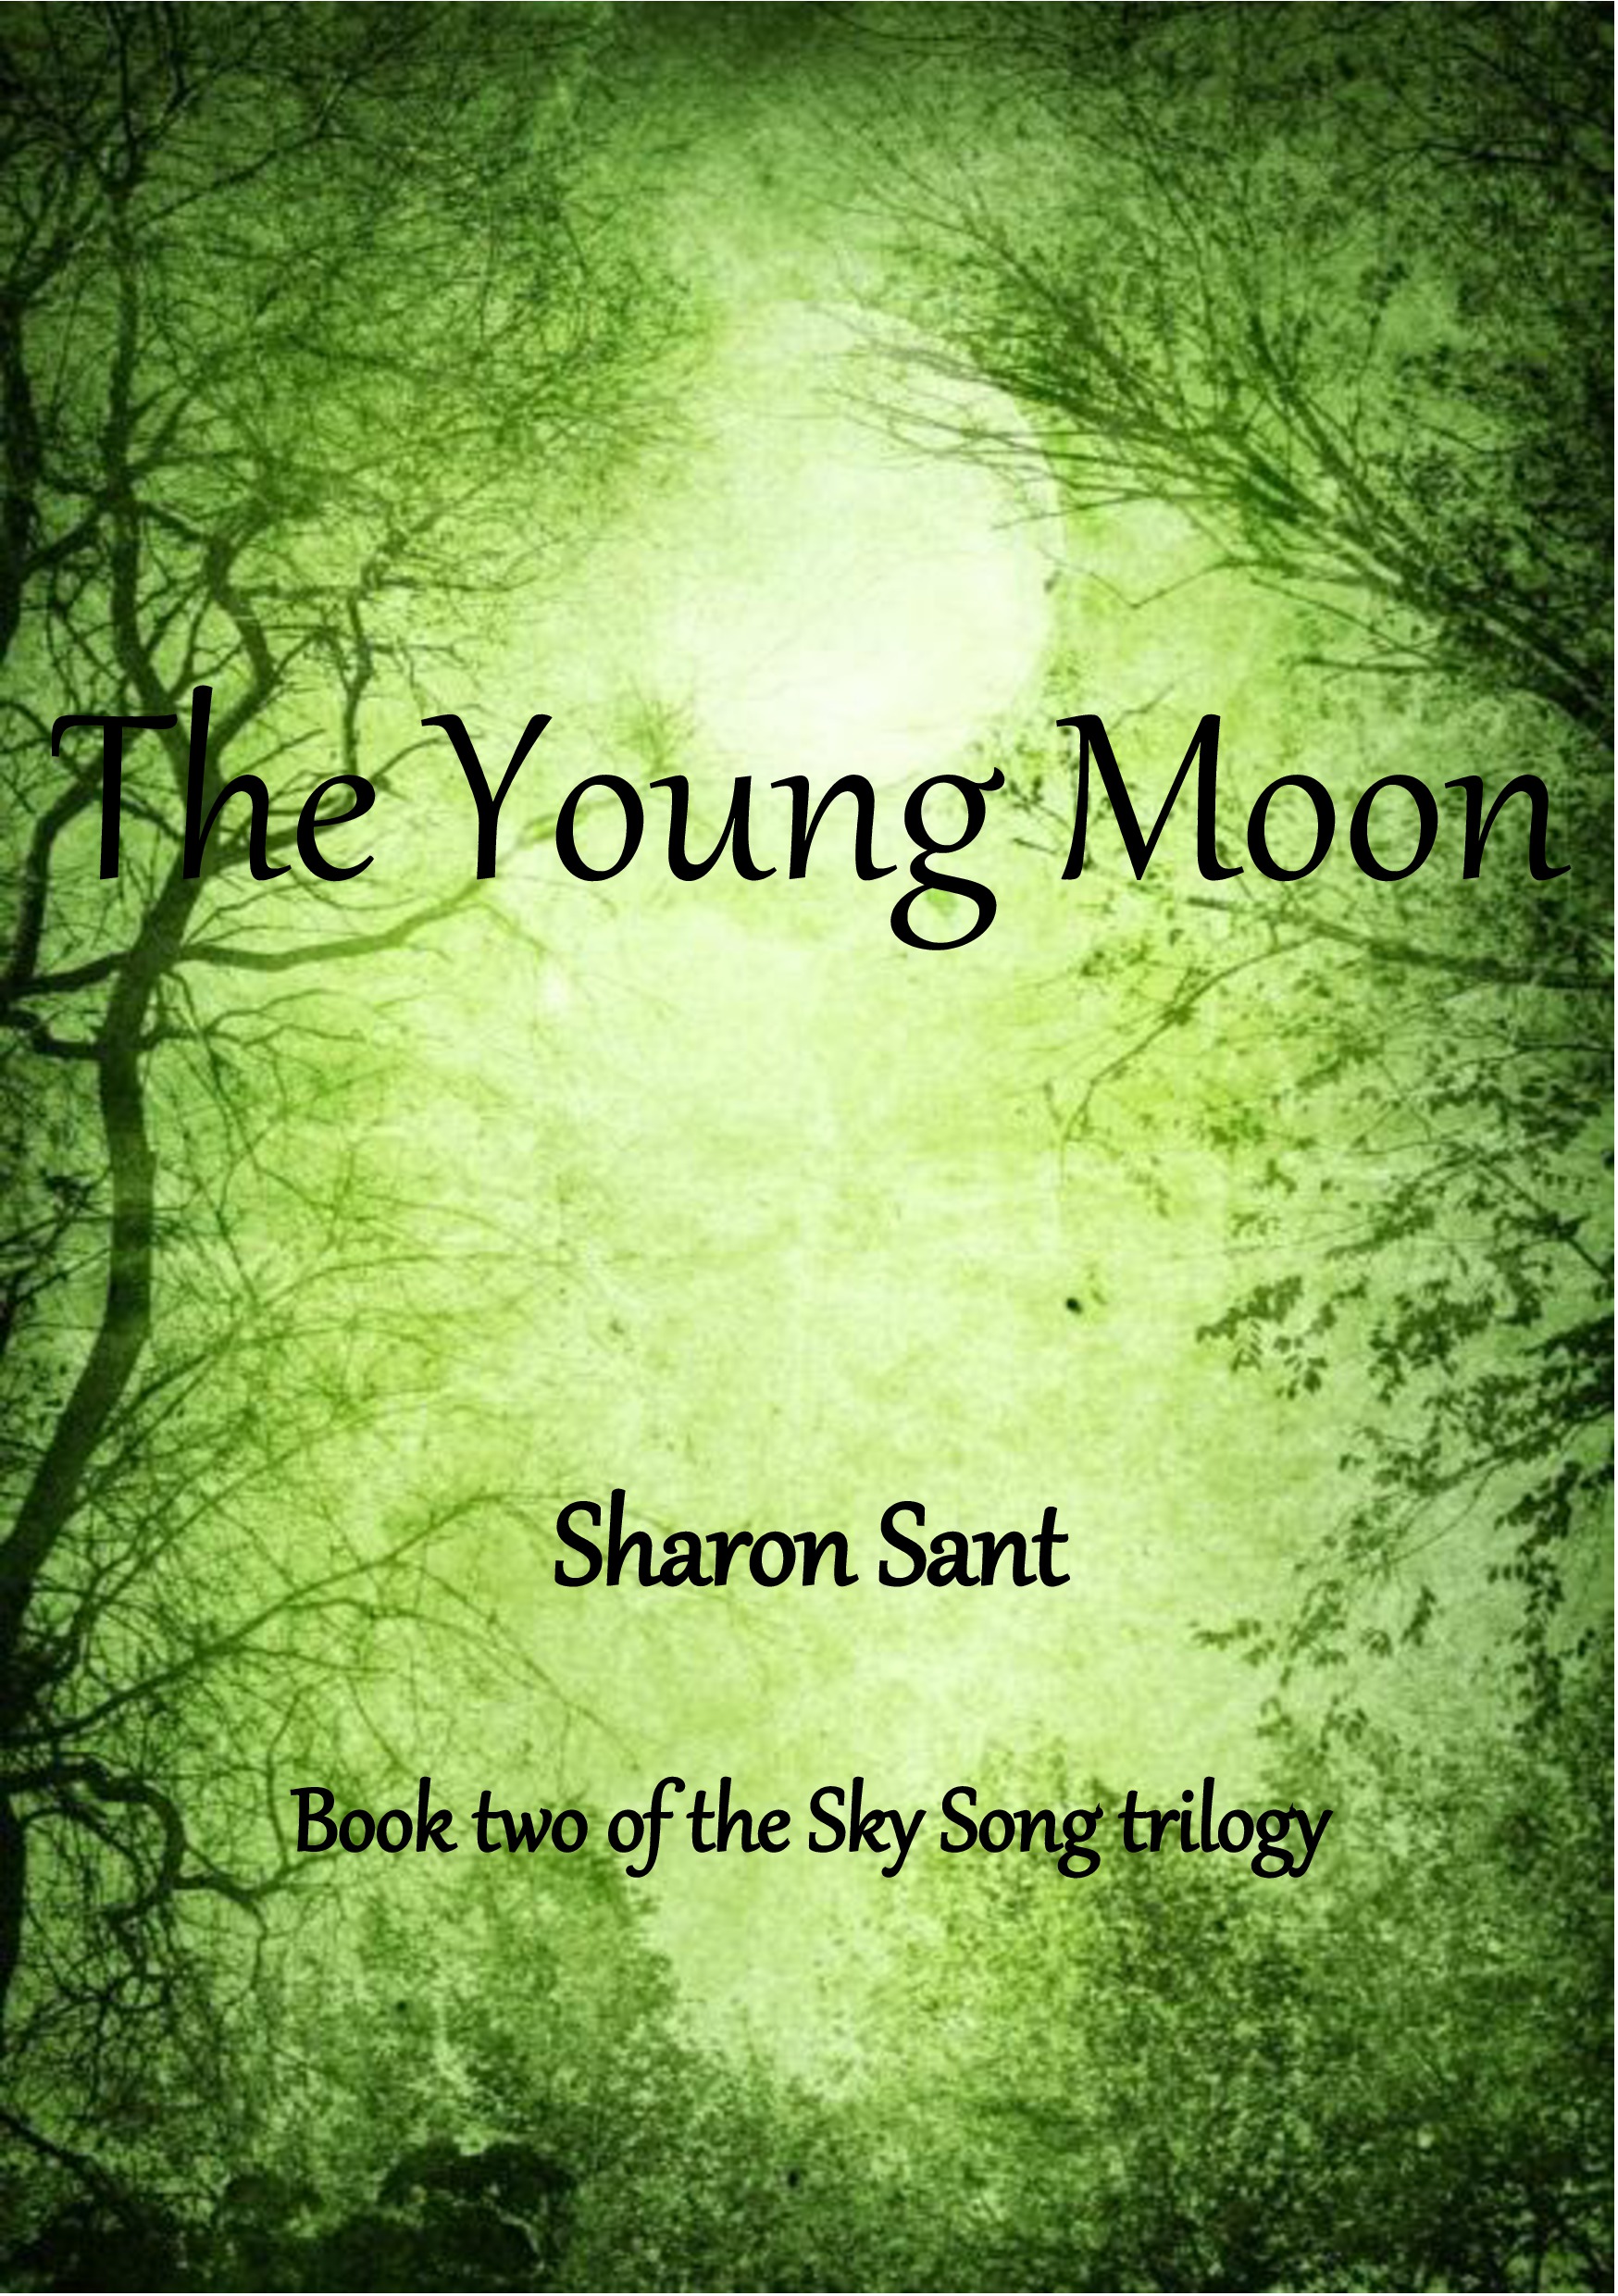 The Young Moon by Sharon Sant